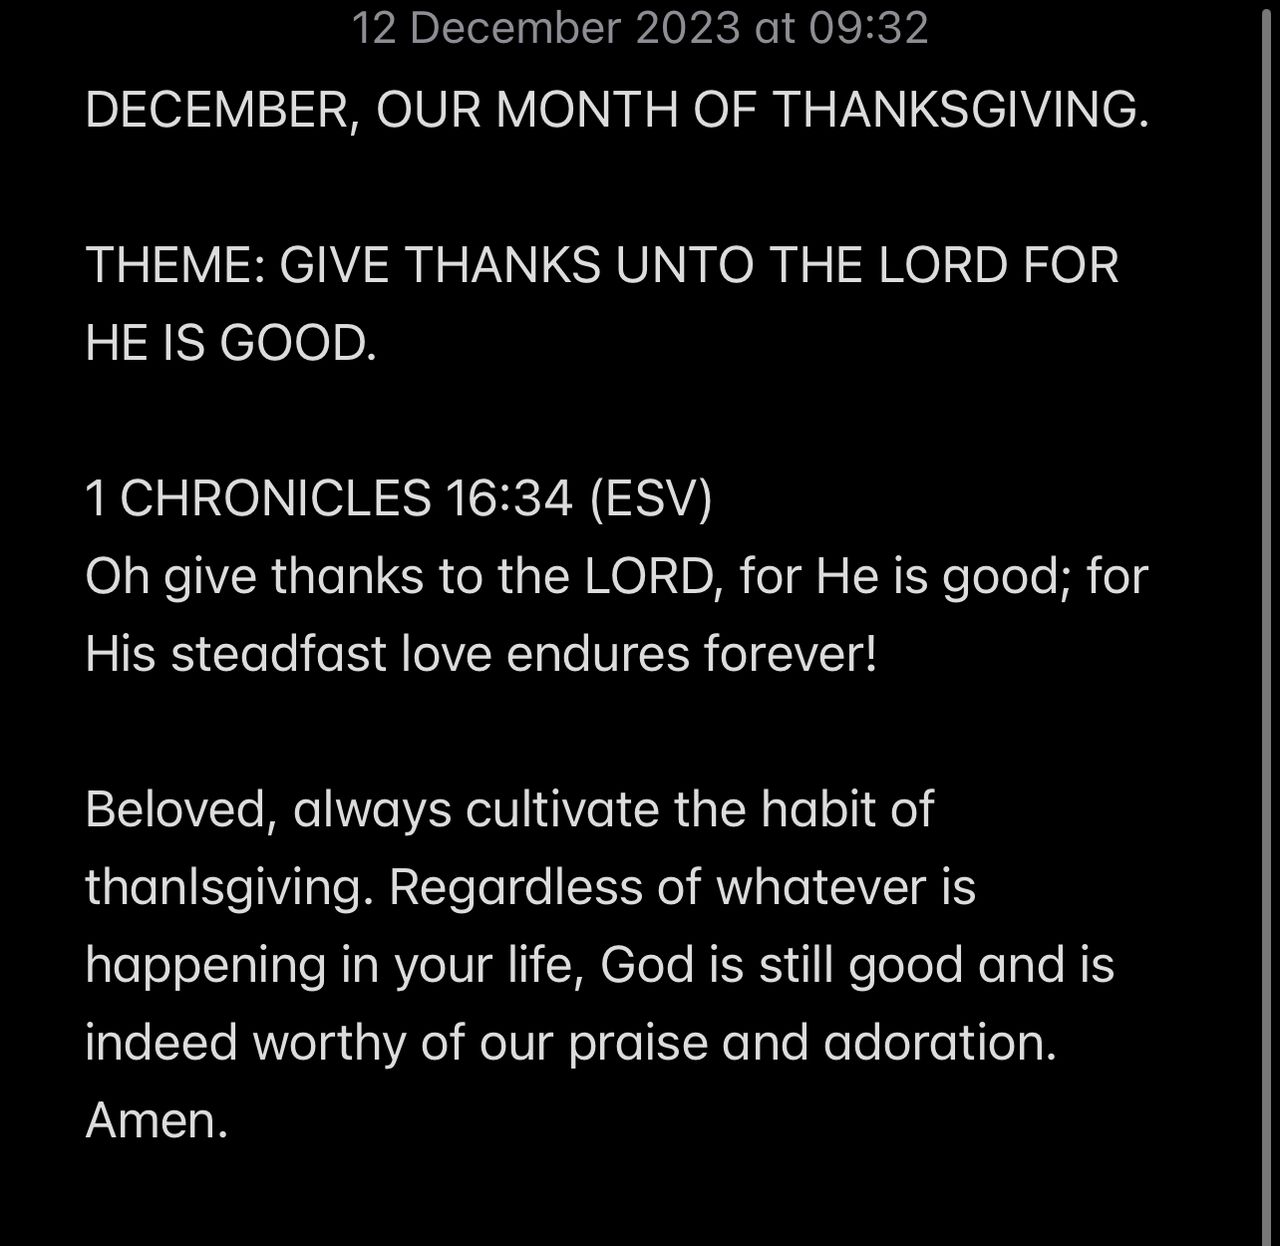 GIVE THANKS UNTO THE LORD FOR HE IS GOOD